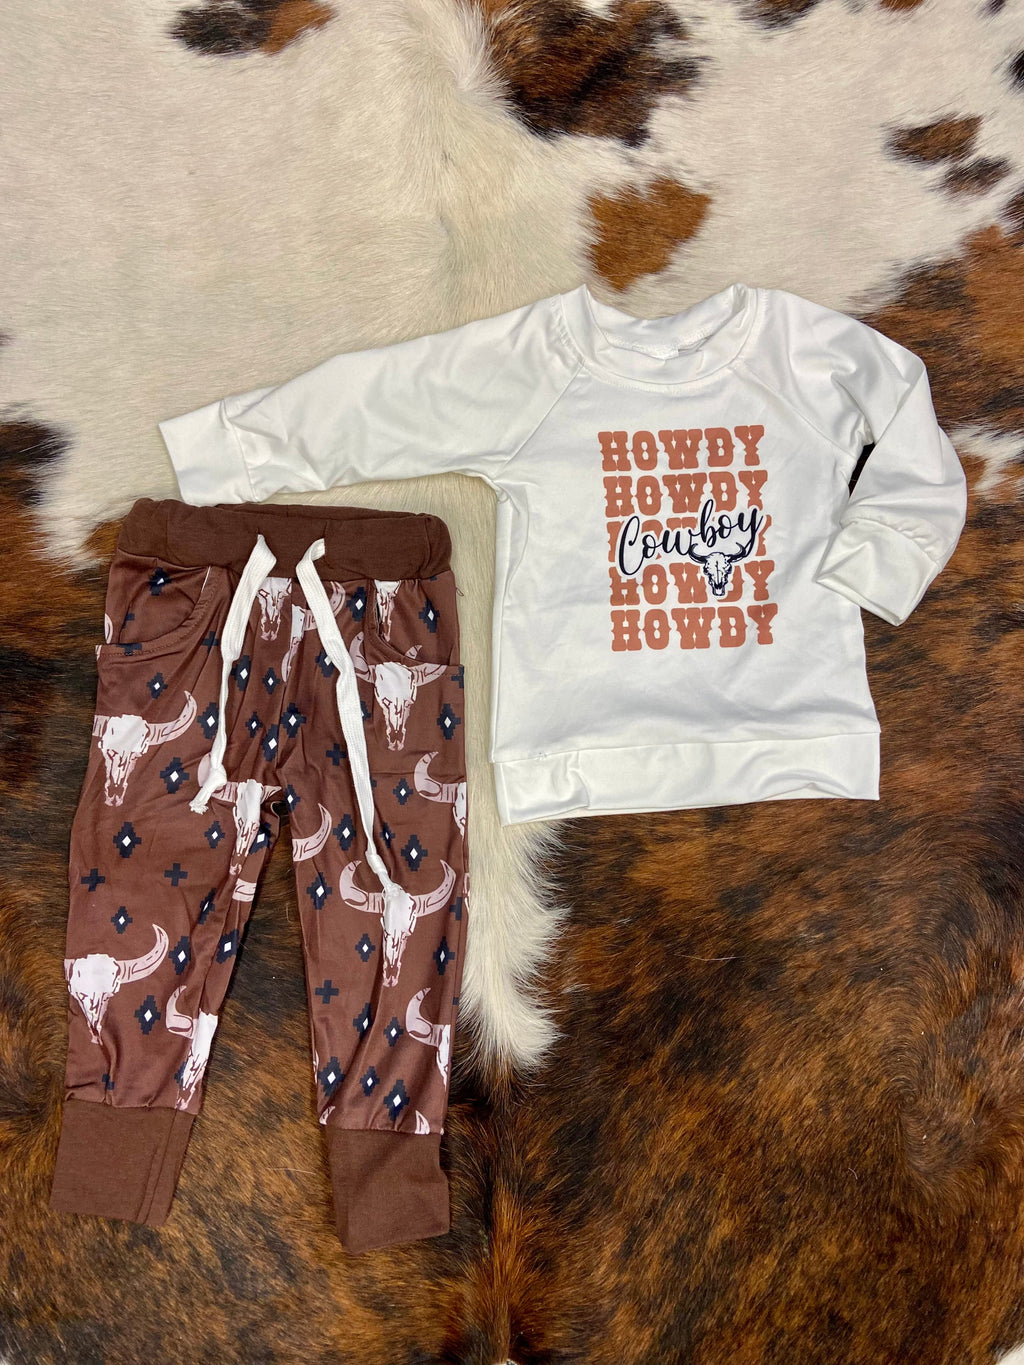 Looking for a rootin’ tootin’ good time? Our Kids Howdy Cowboy Set is just the ticket! This two-piece set is made from butter-soft material, featuring a white long-sleeve top and brown pants with classic cow skulls. Get ready for some wild western fun!